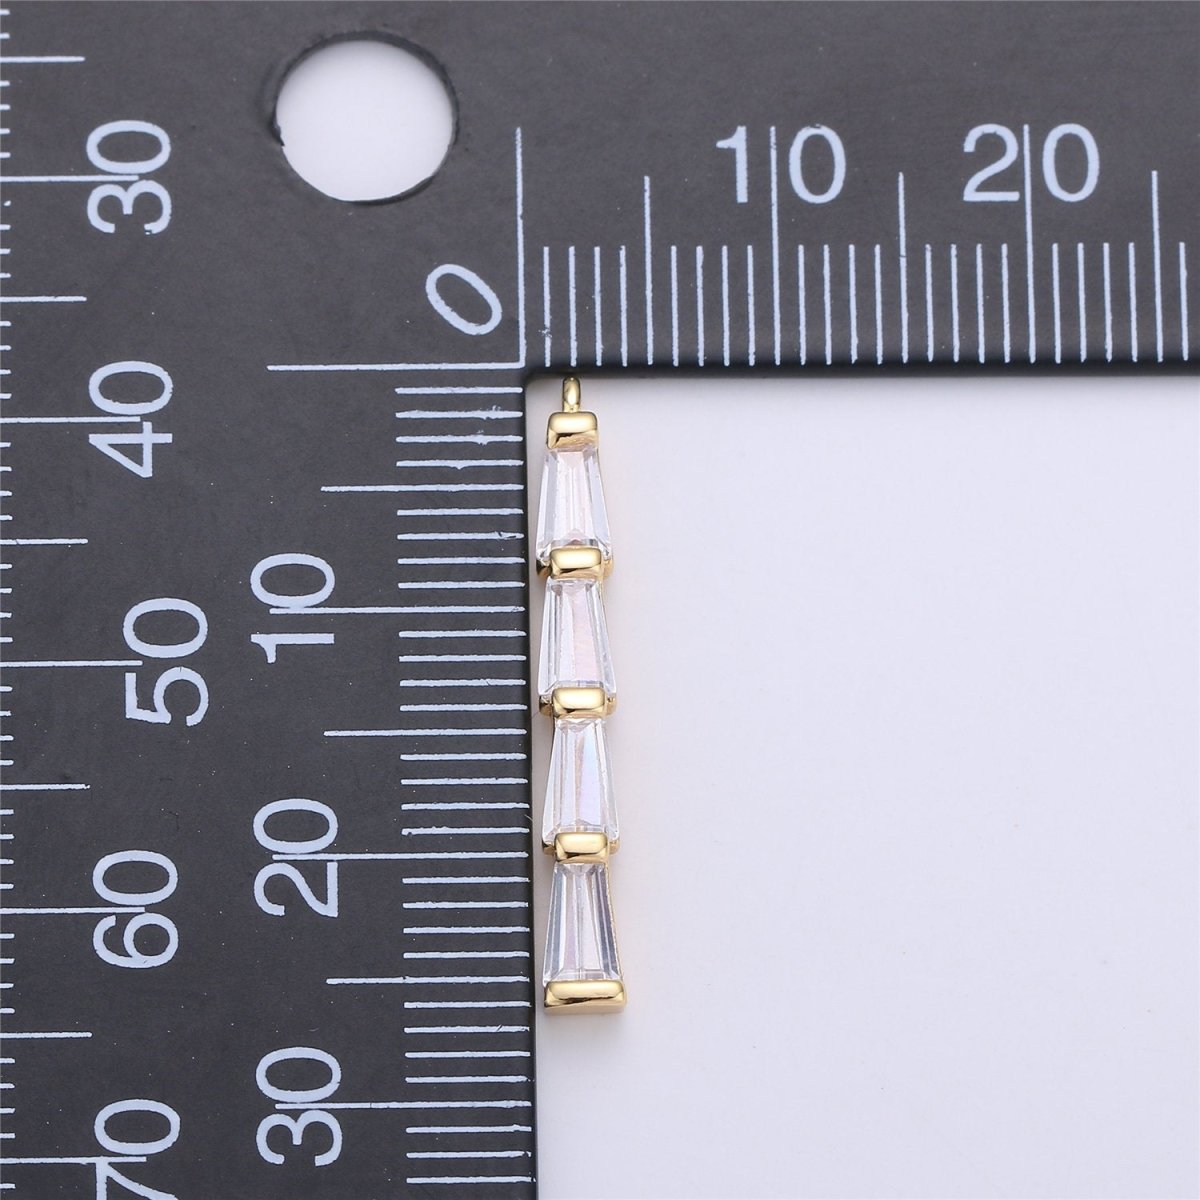 Dainty 24k Gold fIlled Charm Gold cubic bar Charm ,Baguette Stick Charm, Cubic Dangle charm for Necklace Earring Jewelry Making C-670 - DLUXCA